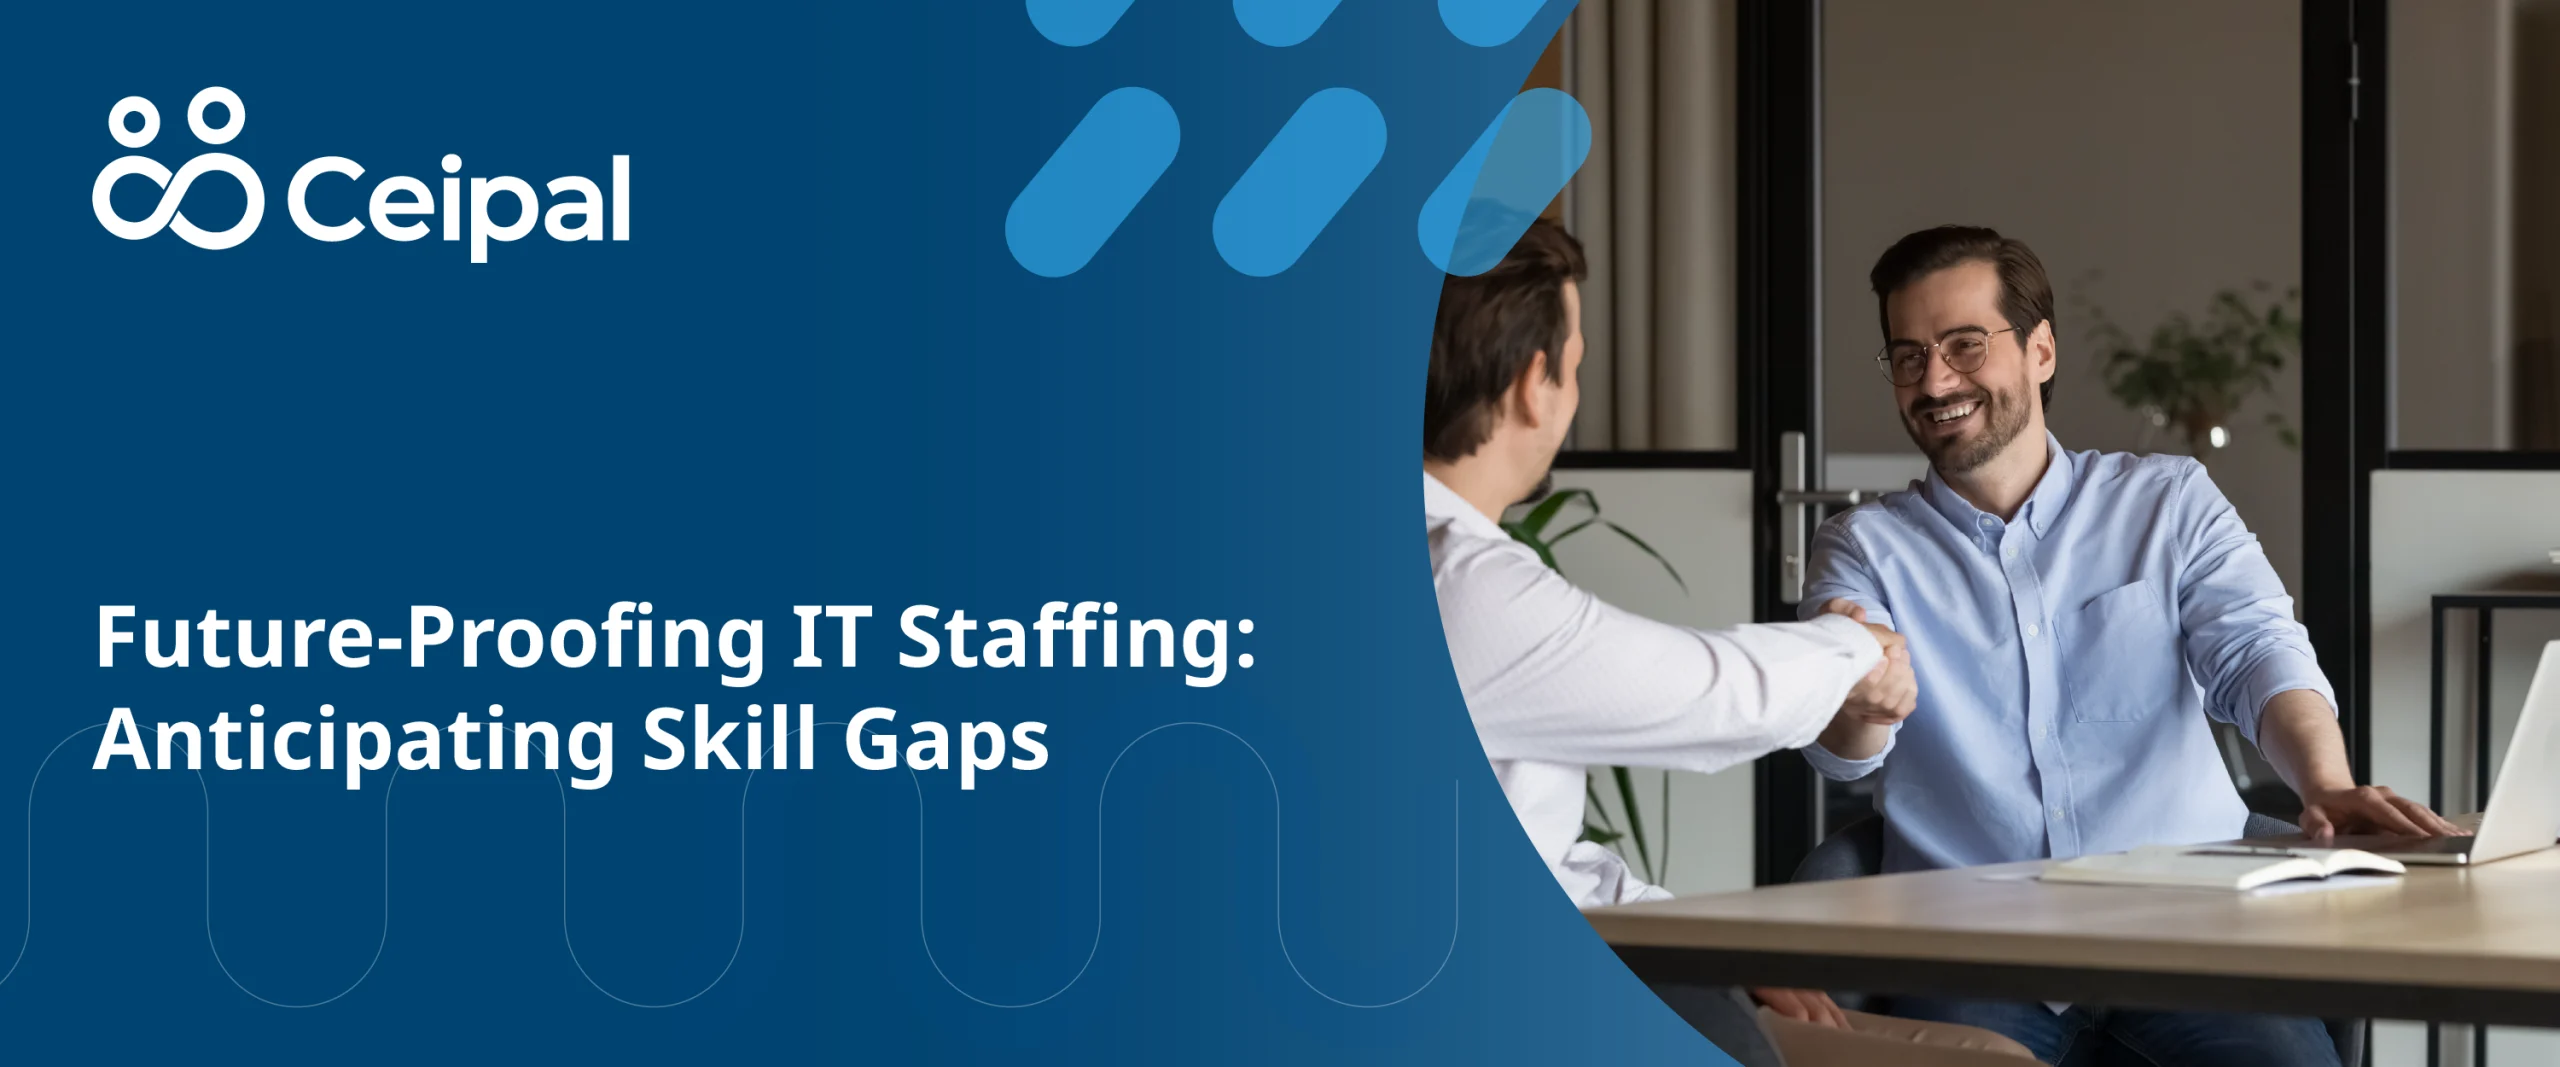 Future-Proofing IT Staffing: Anticipating Skill Gaps